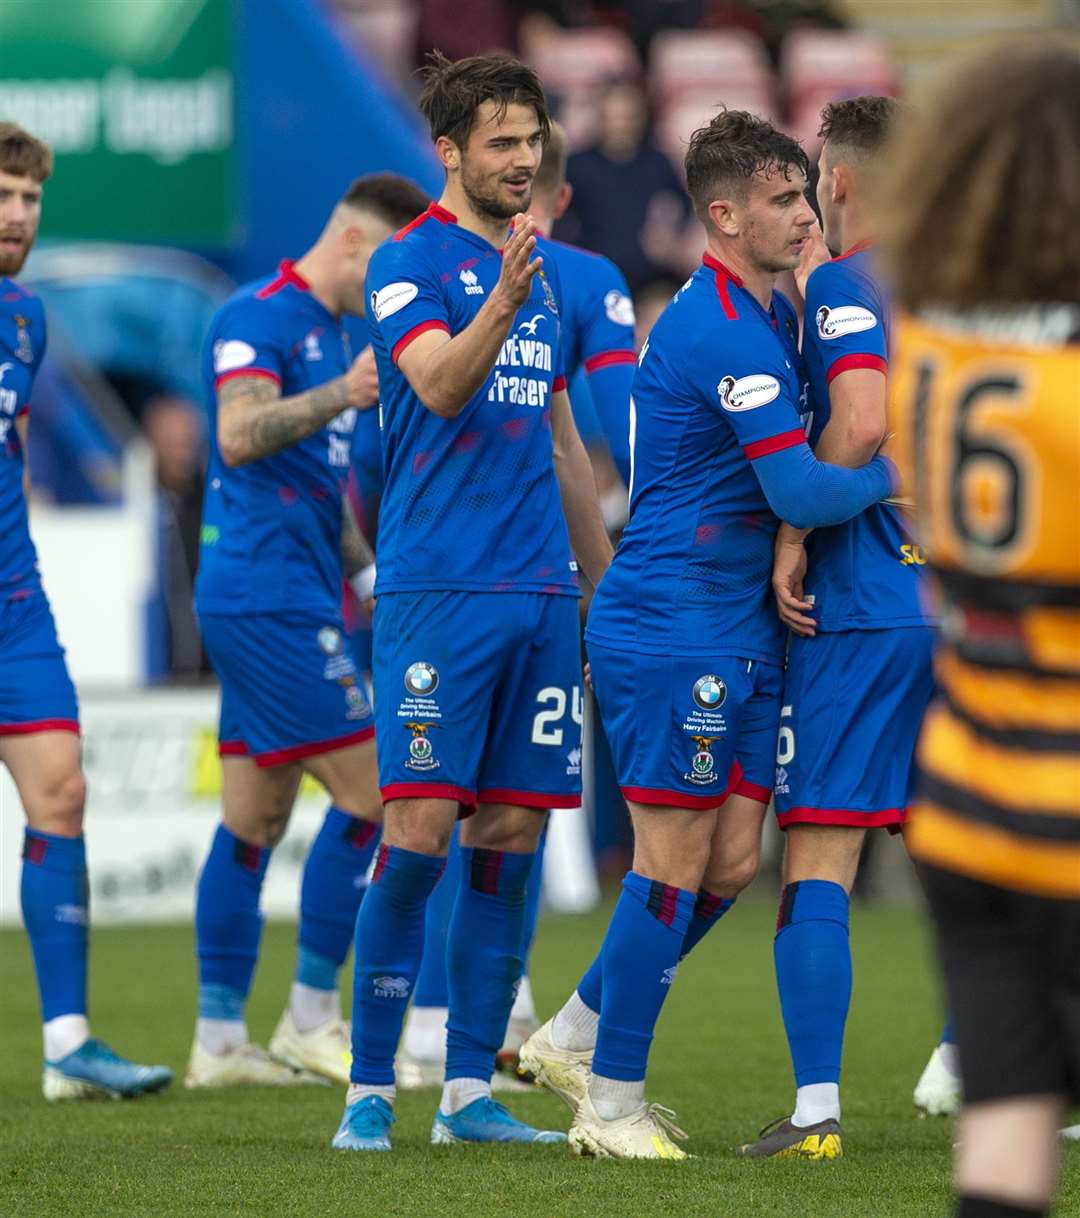 Picture - Ken Macpherson, Inverness. Scottish Challenge Cup 4th Round. Inverness CT(3) v Alloa(0). 12.10.19. ICT's Charlie Trafford celebrates his side's 2nd goal.